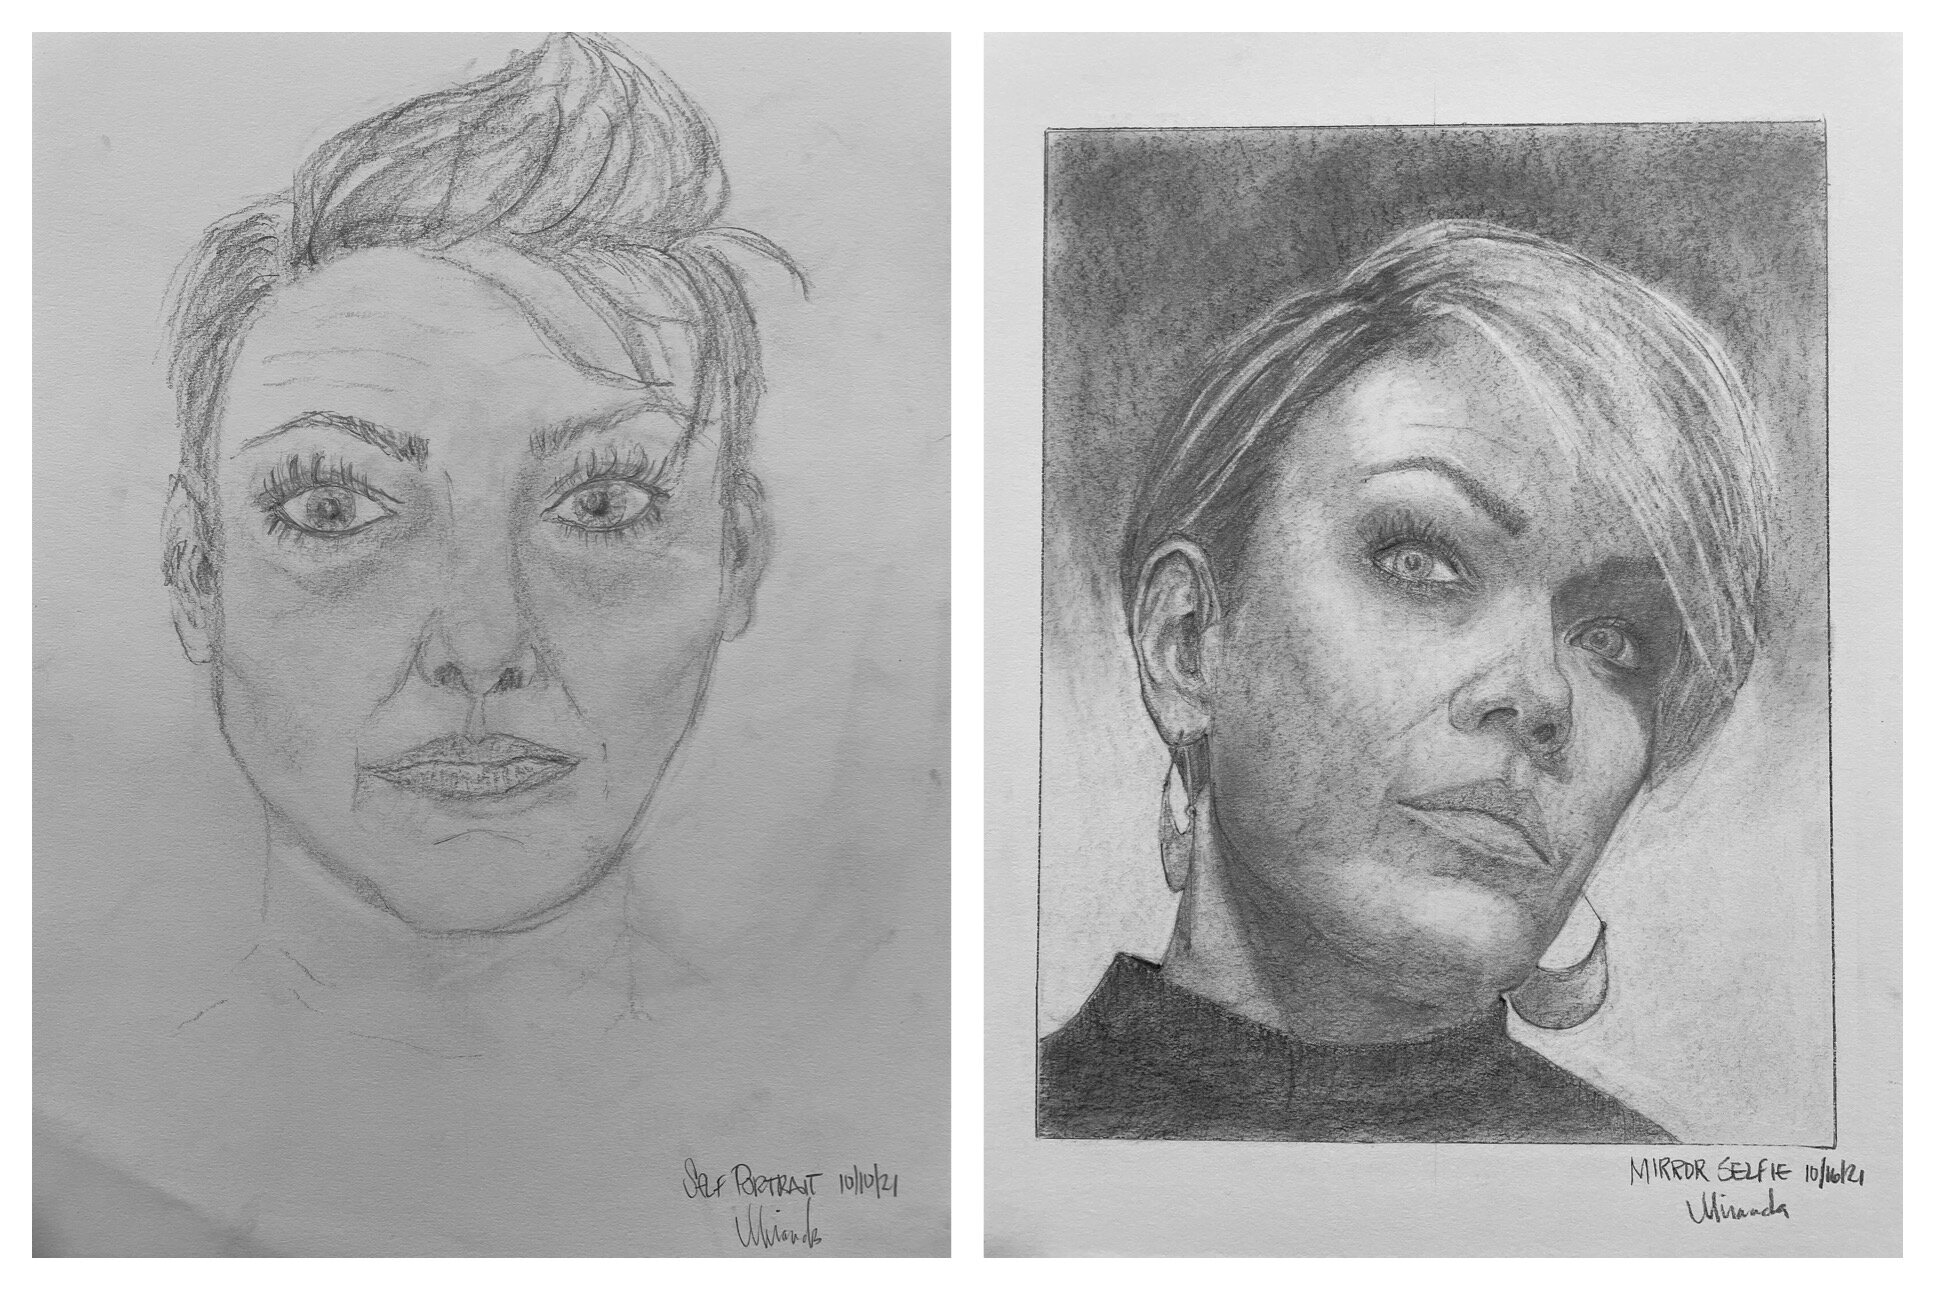 Miranda's Before and After Self Portrait Drawings Oct 11-6, 2021